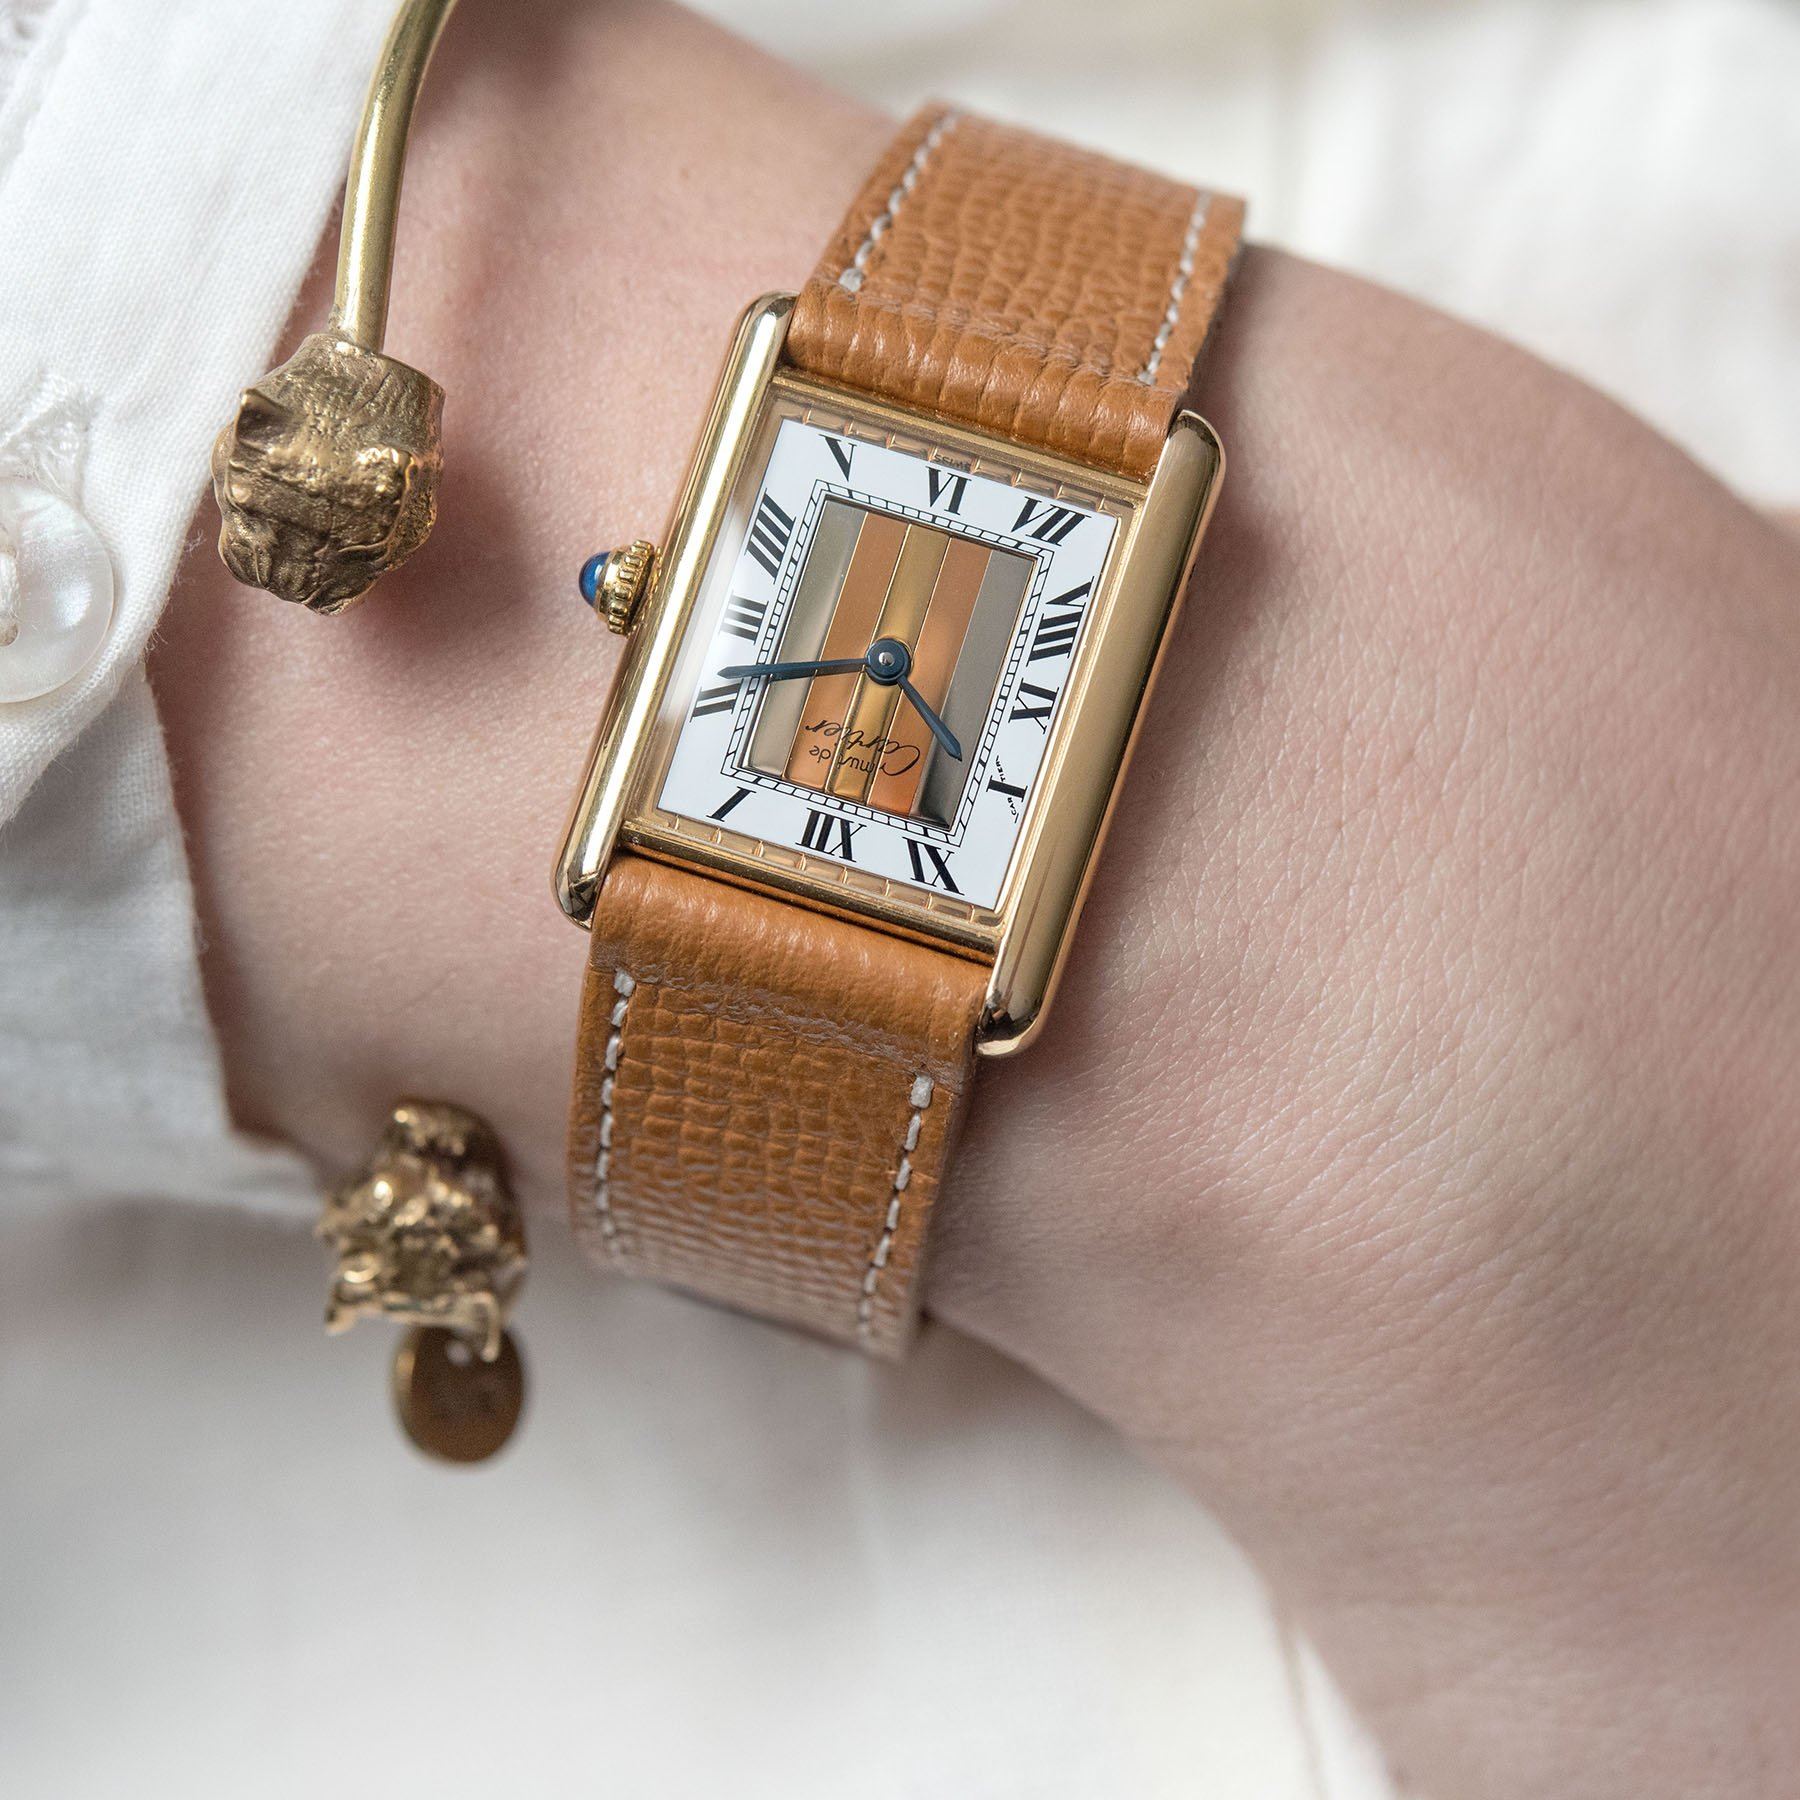 Vintage Cartier Watches - Quality Craftsmanship & Contemporary Styling